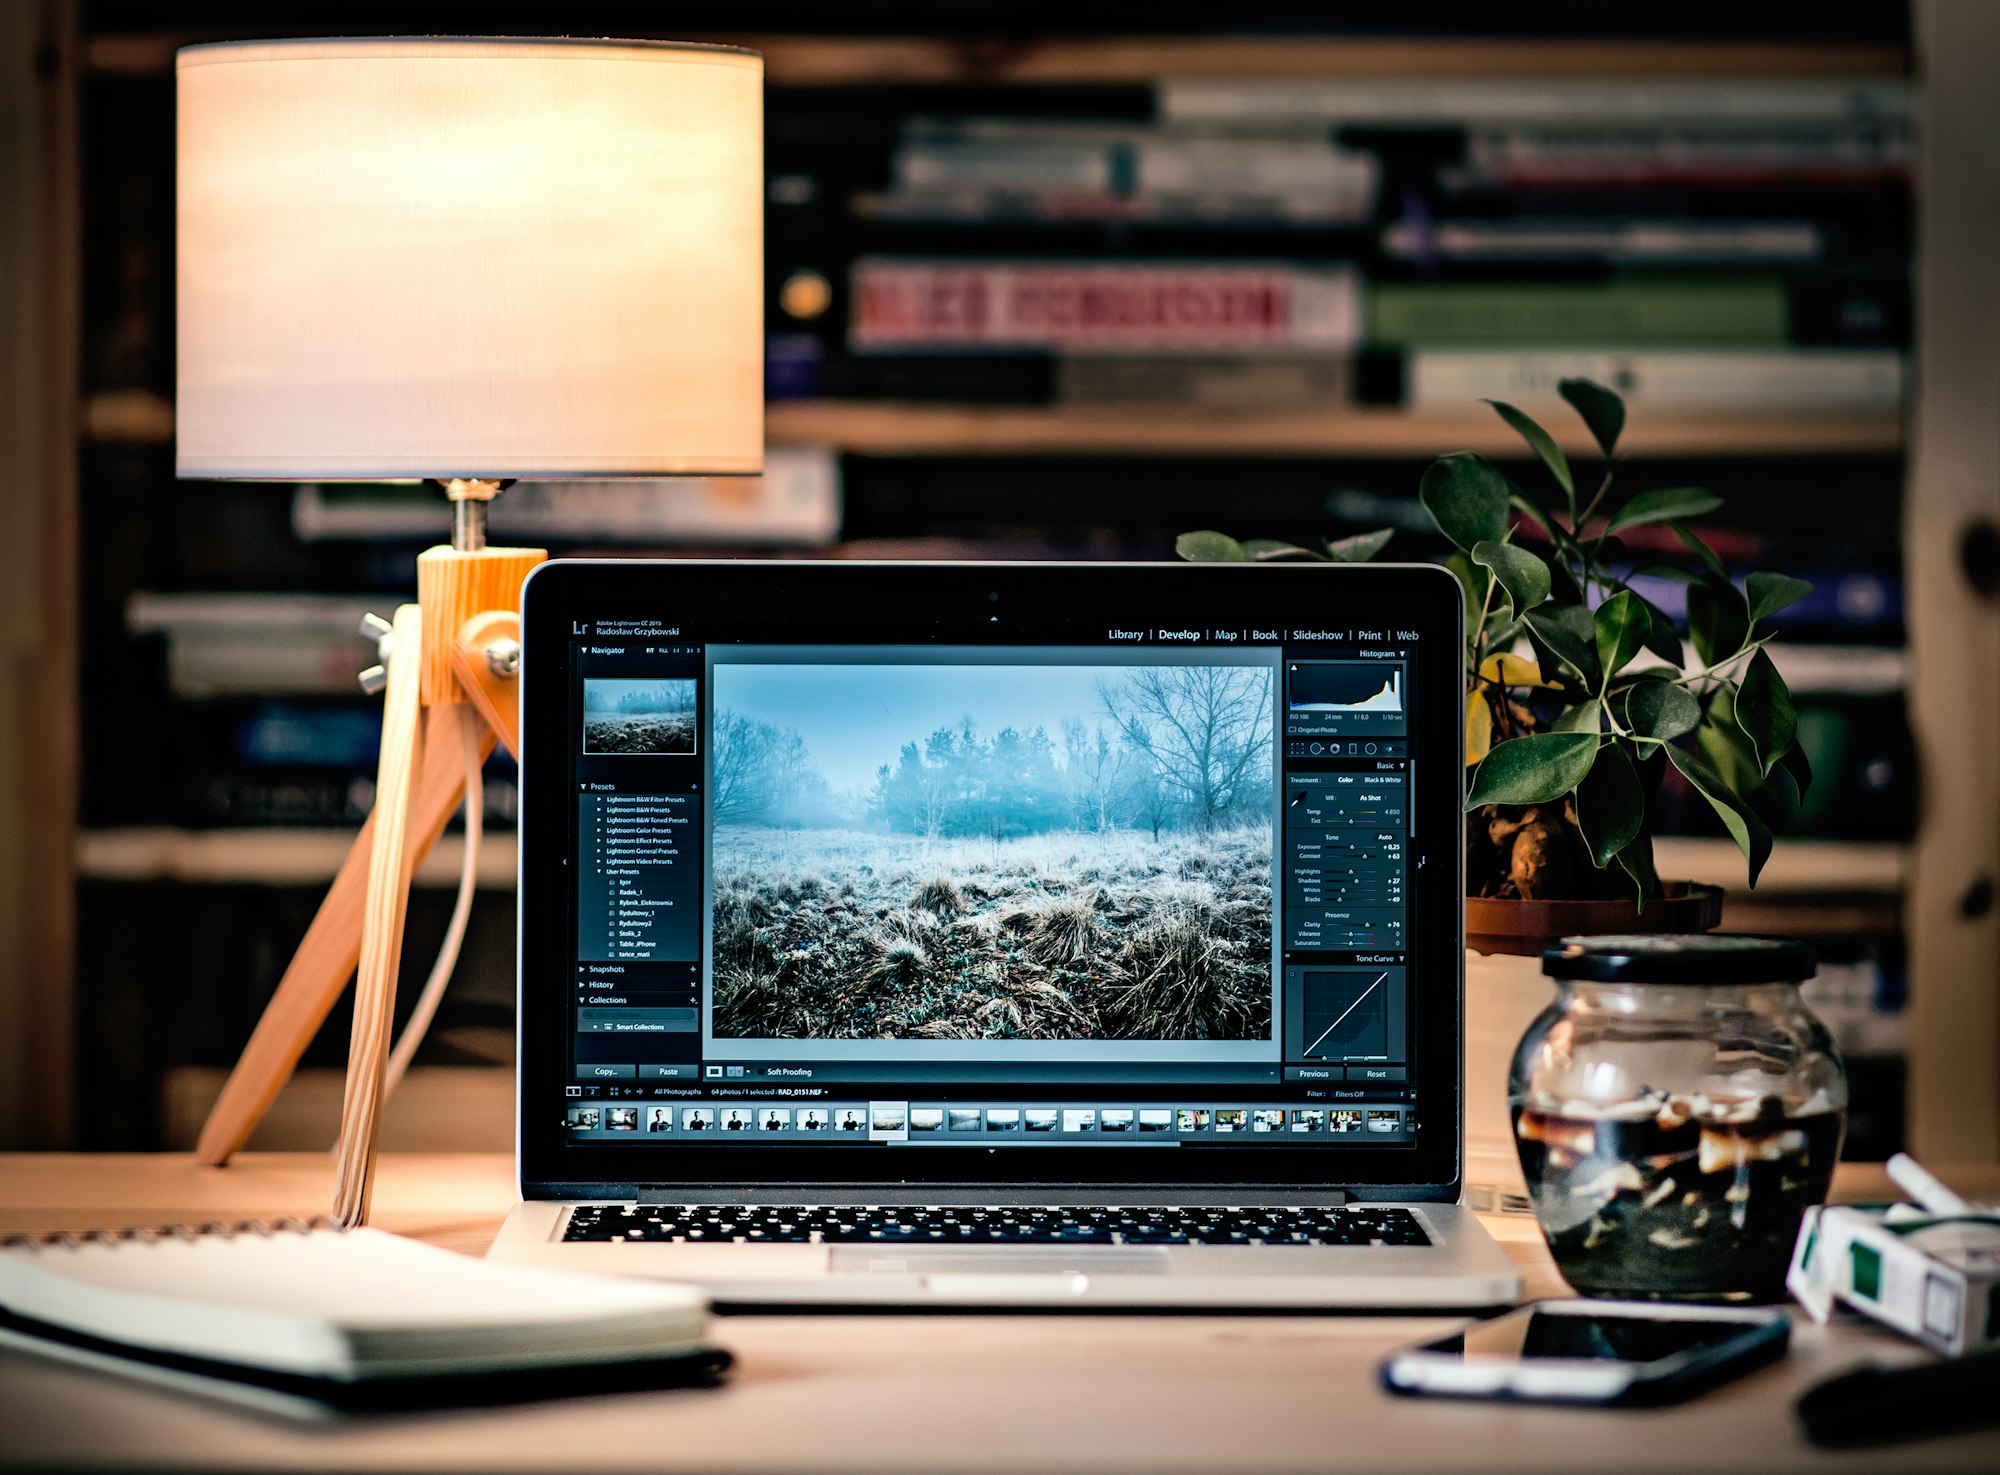 23 sites to find free stock images in 2022